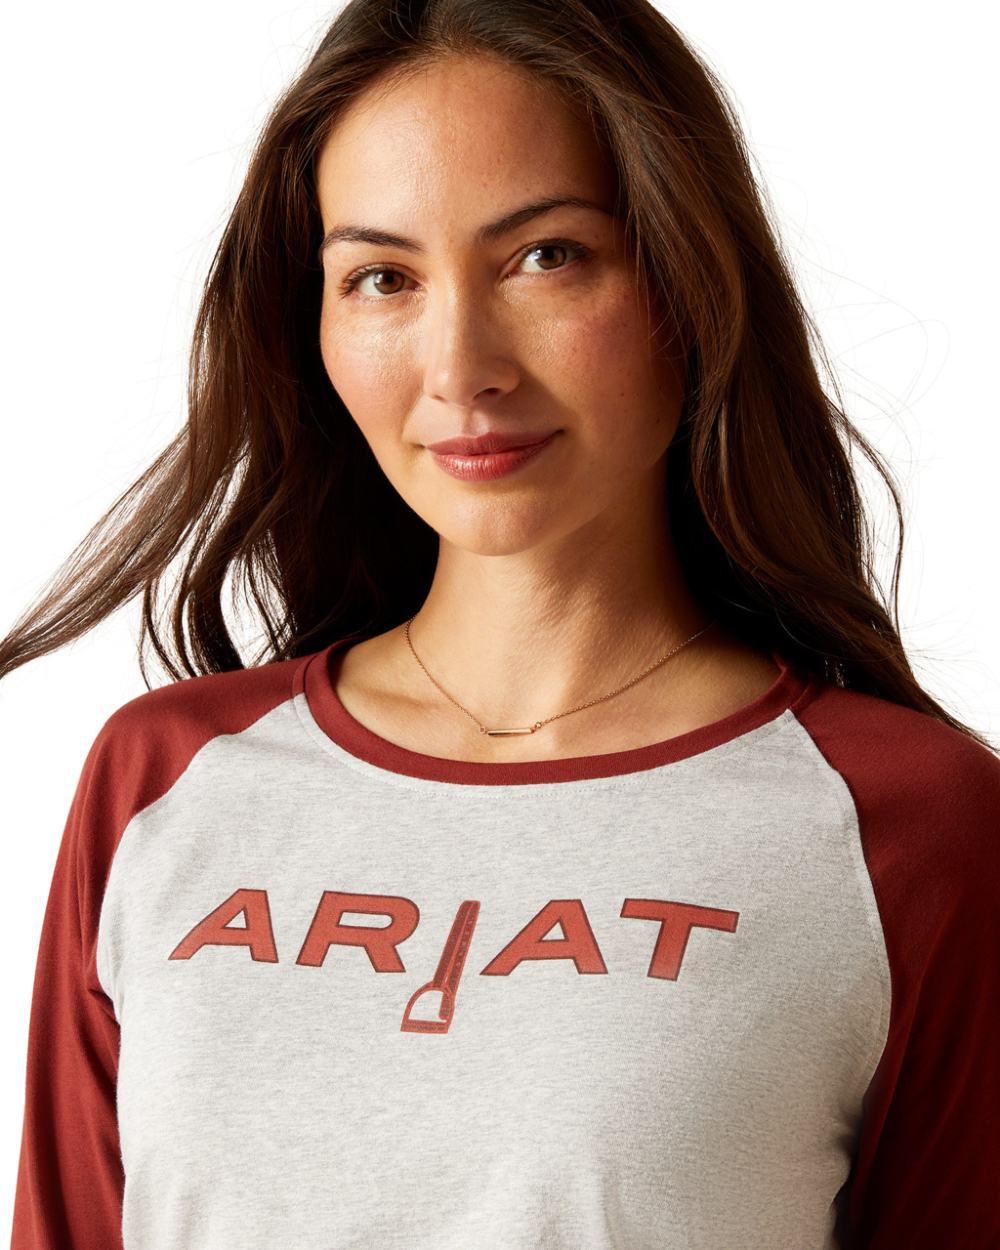 Ariat Womens Stirrup Leather Long Sleeve T-Shirt in Heather Grey/Fired Brick